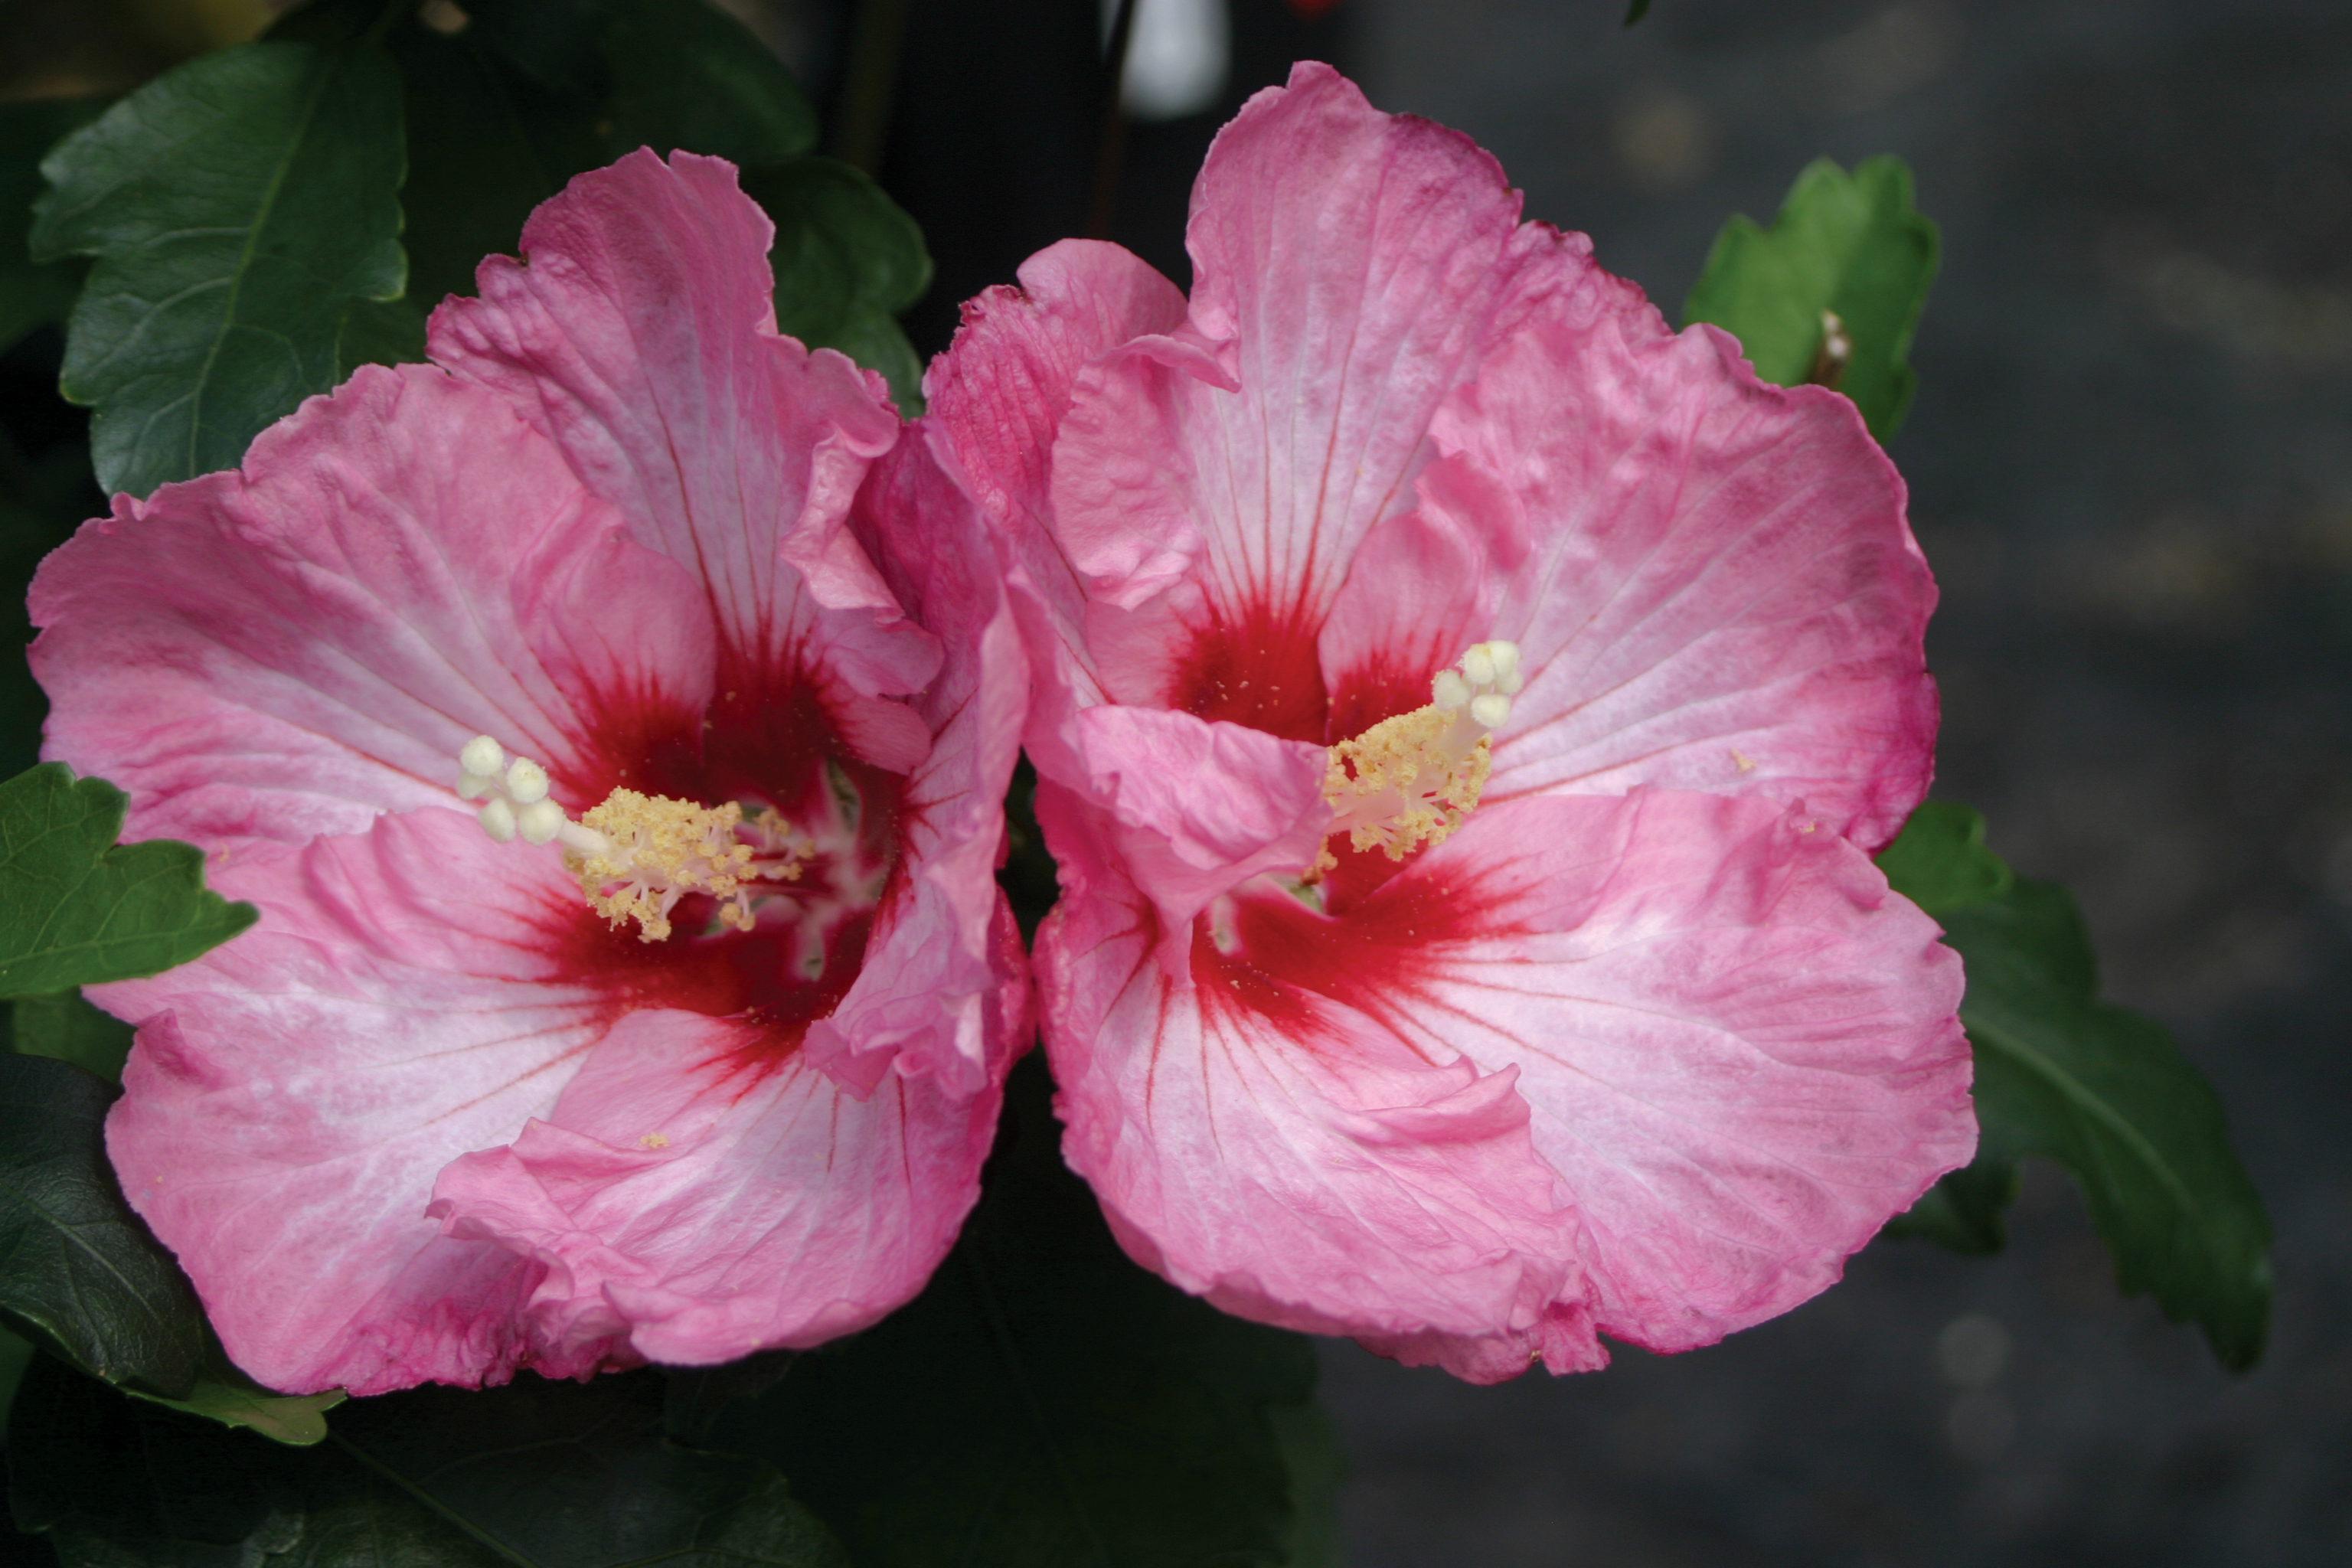 6 Rose Of Sharon Garden Hibiscus Live Plants well Rooted 8 to 14” tall  Look! 